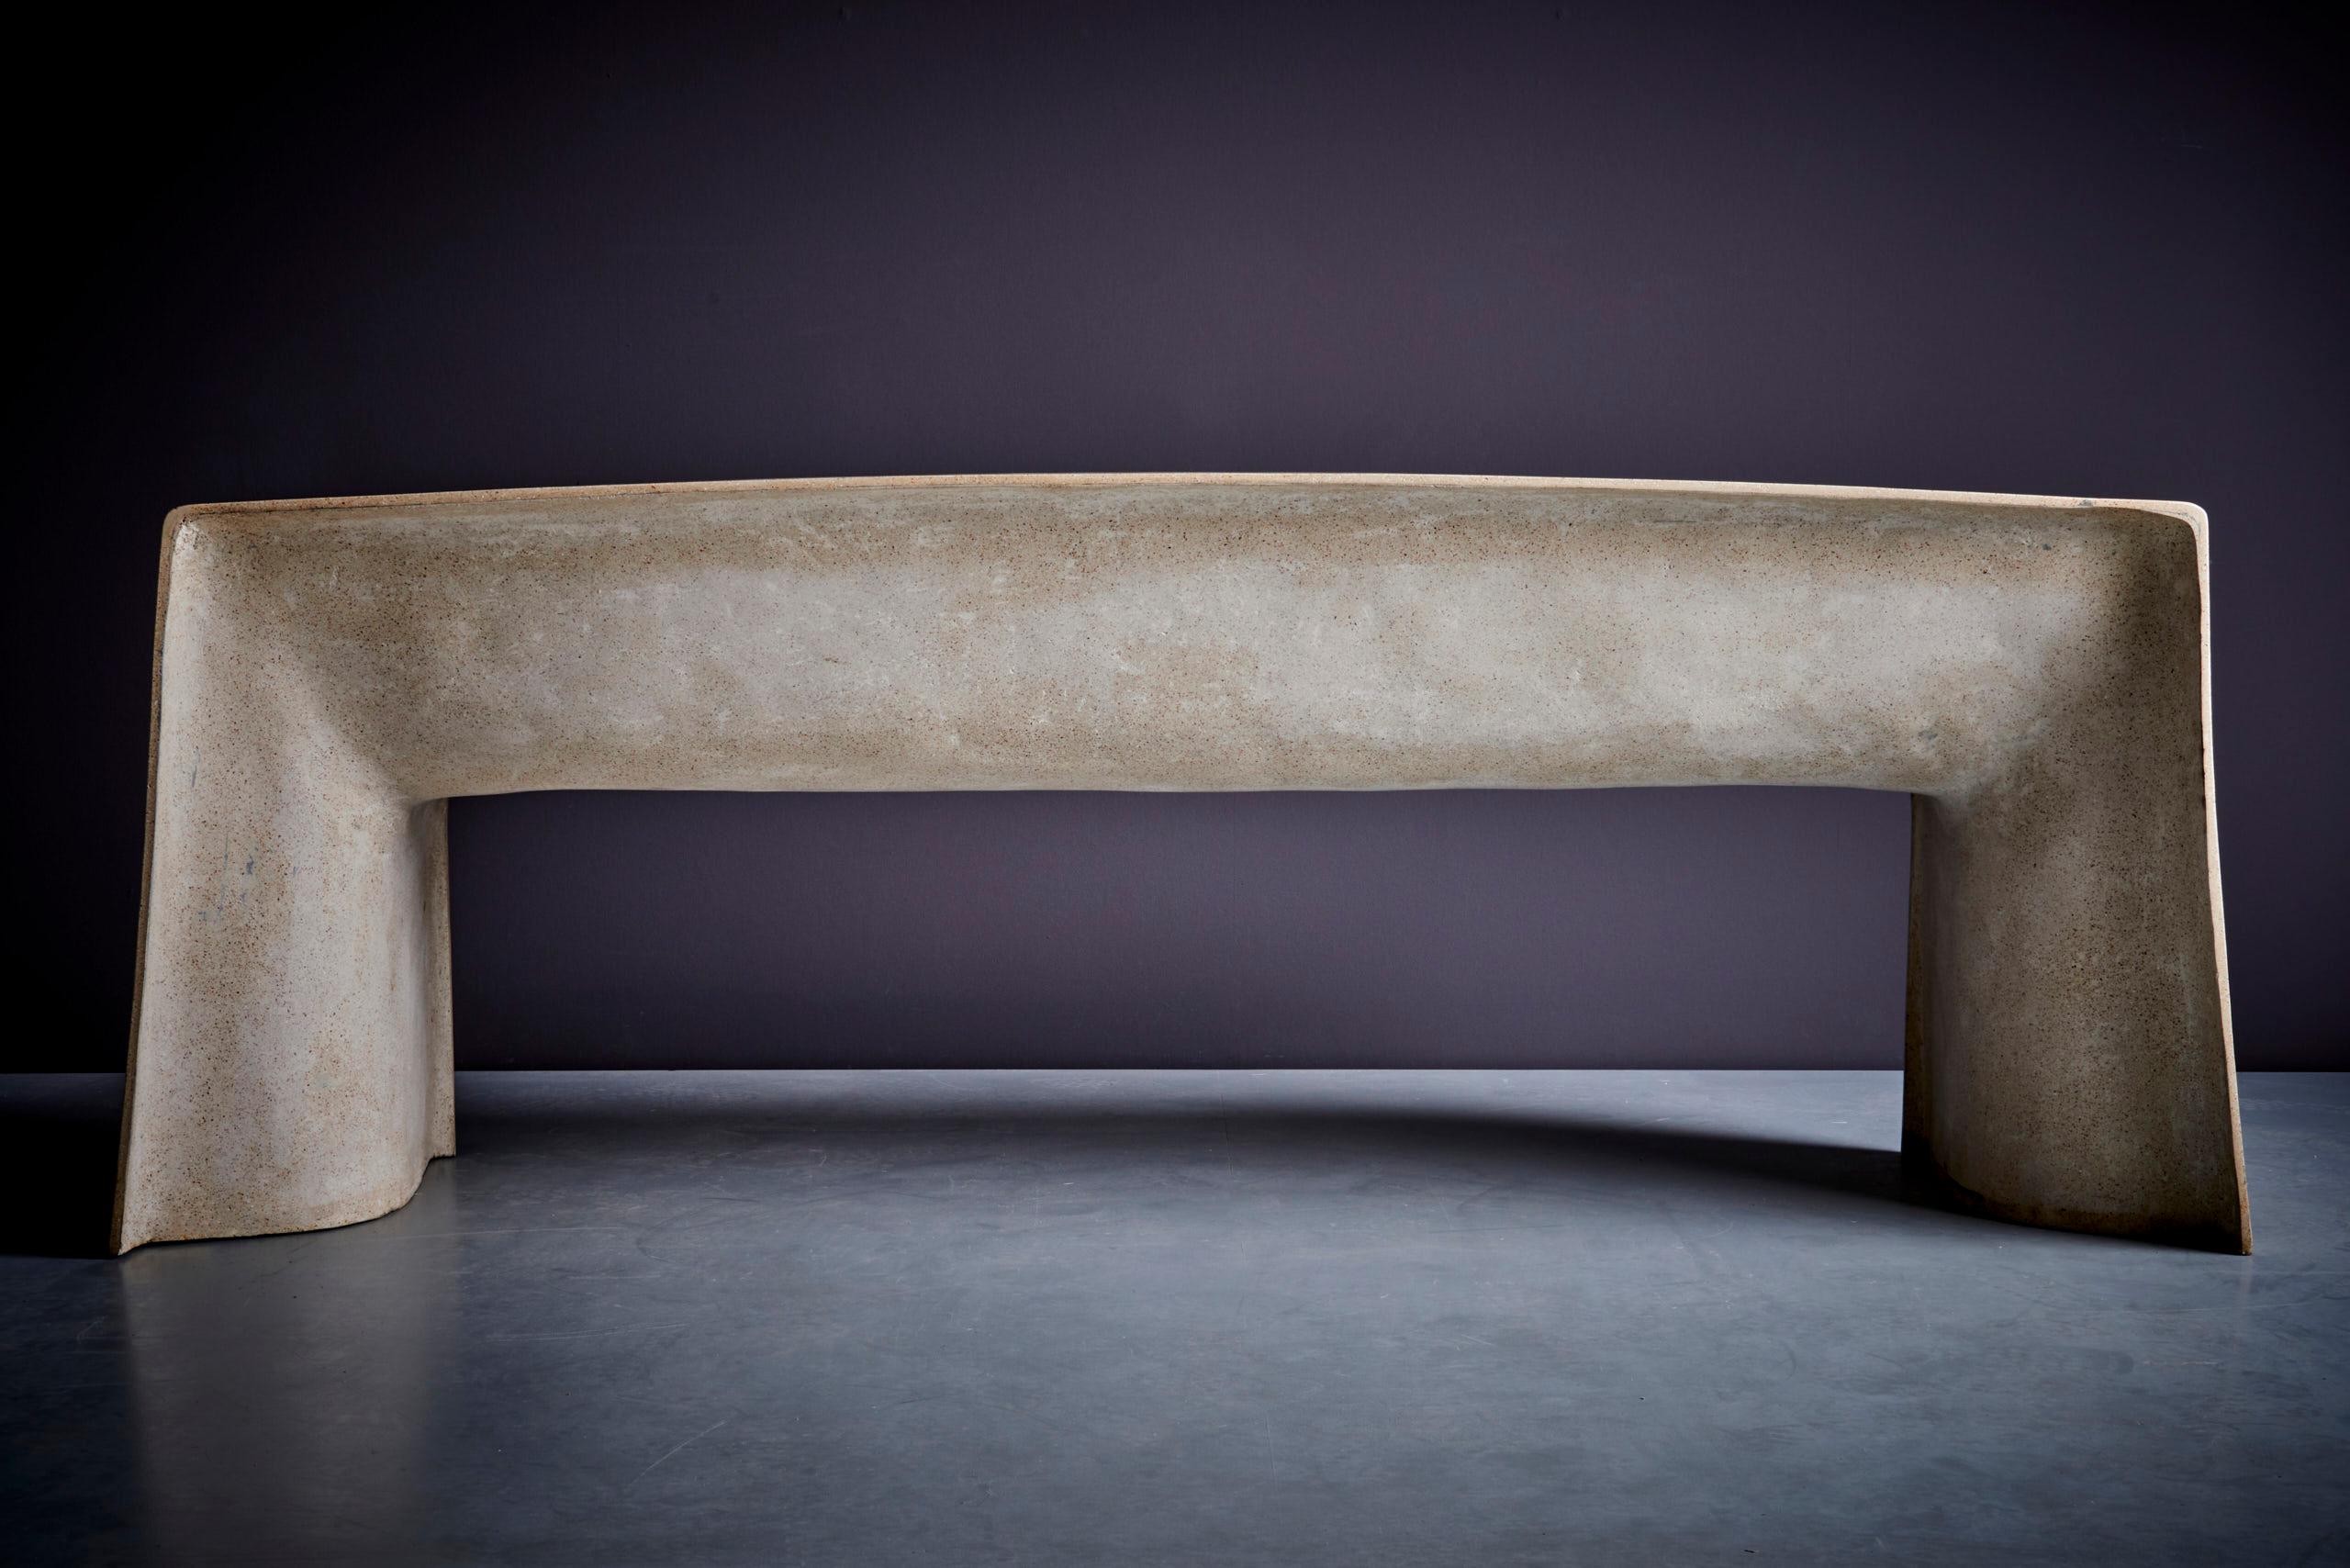 Architectural Concrete Bench by Martin Kleppe, Germany, circa 2011 For Sale 2